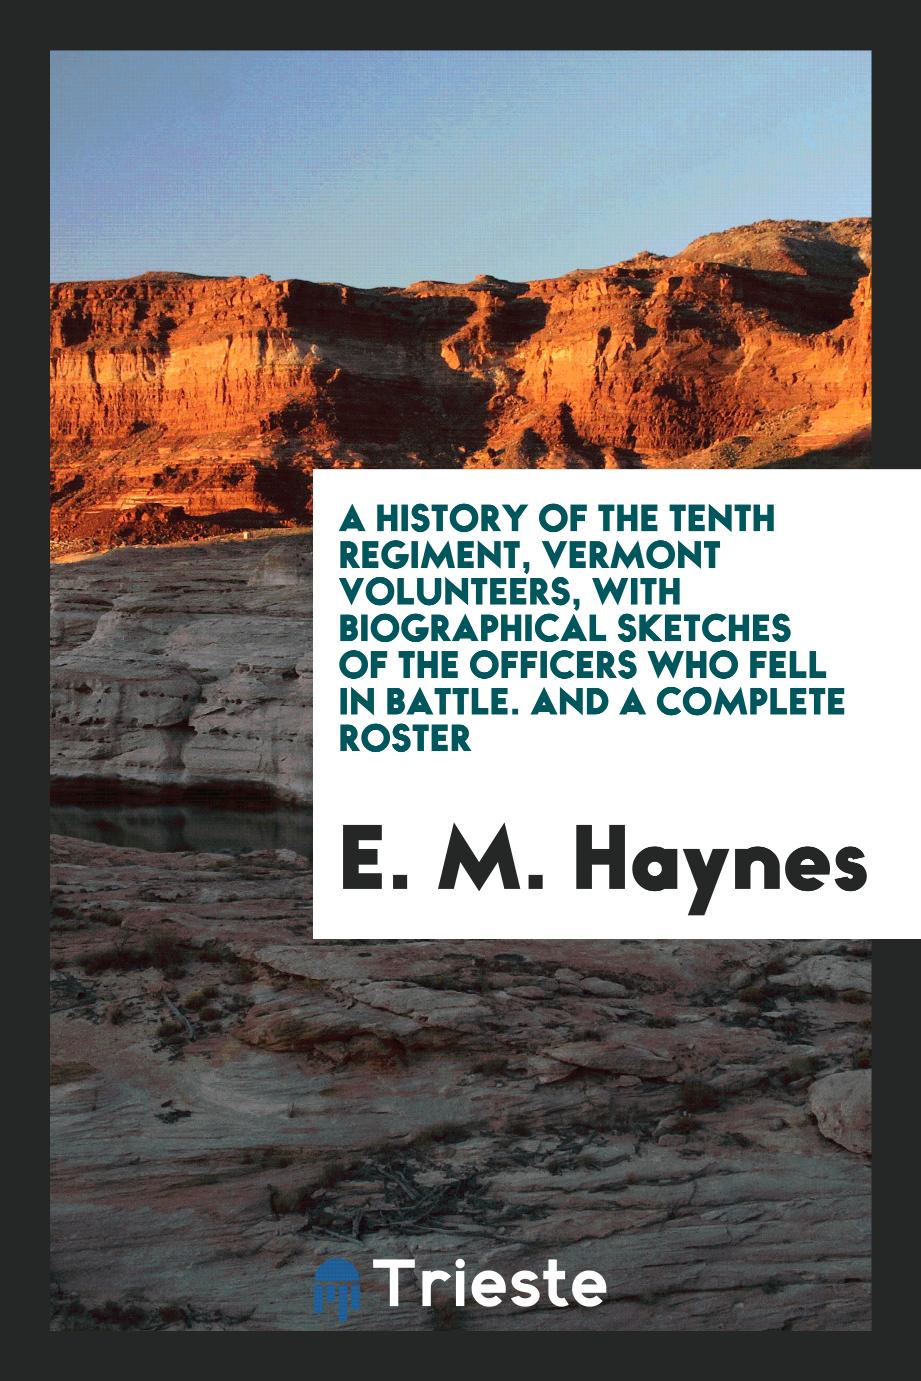 A History of the Tenth Regiment, Vermont Volunteers, with Biographical Sketches of the Officers Who Fell in Battle. And a Complete Roster